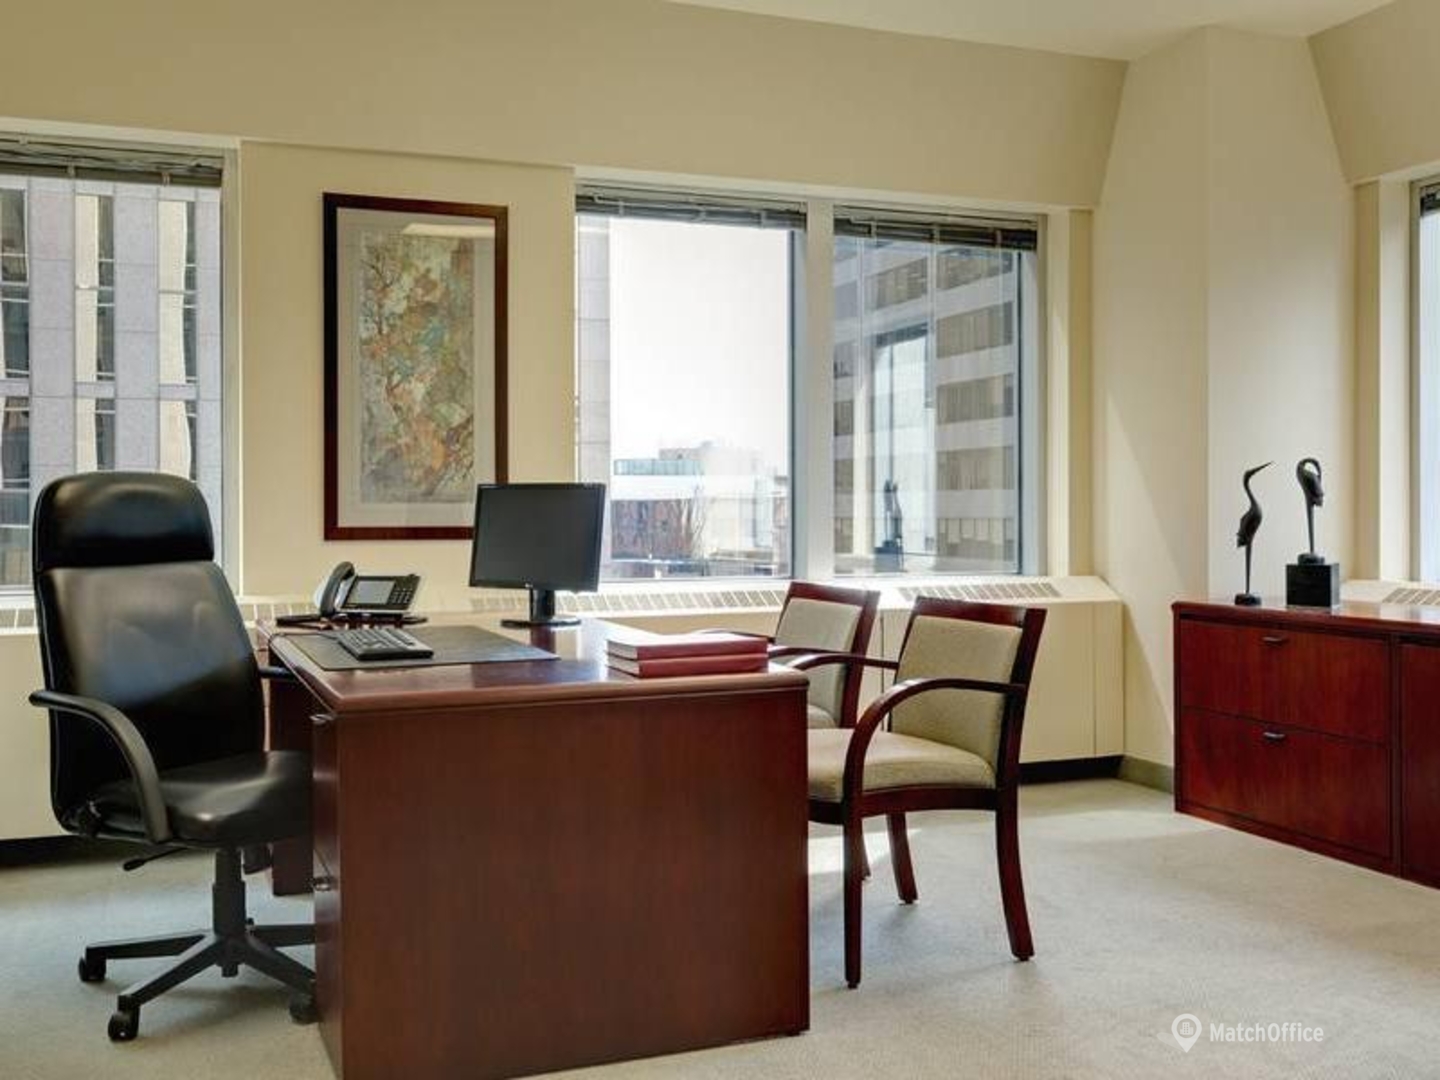 Shared Workspace on The Exchange Tower, Toronto for Lease | MatchOffice.com